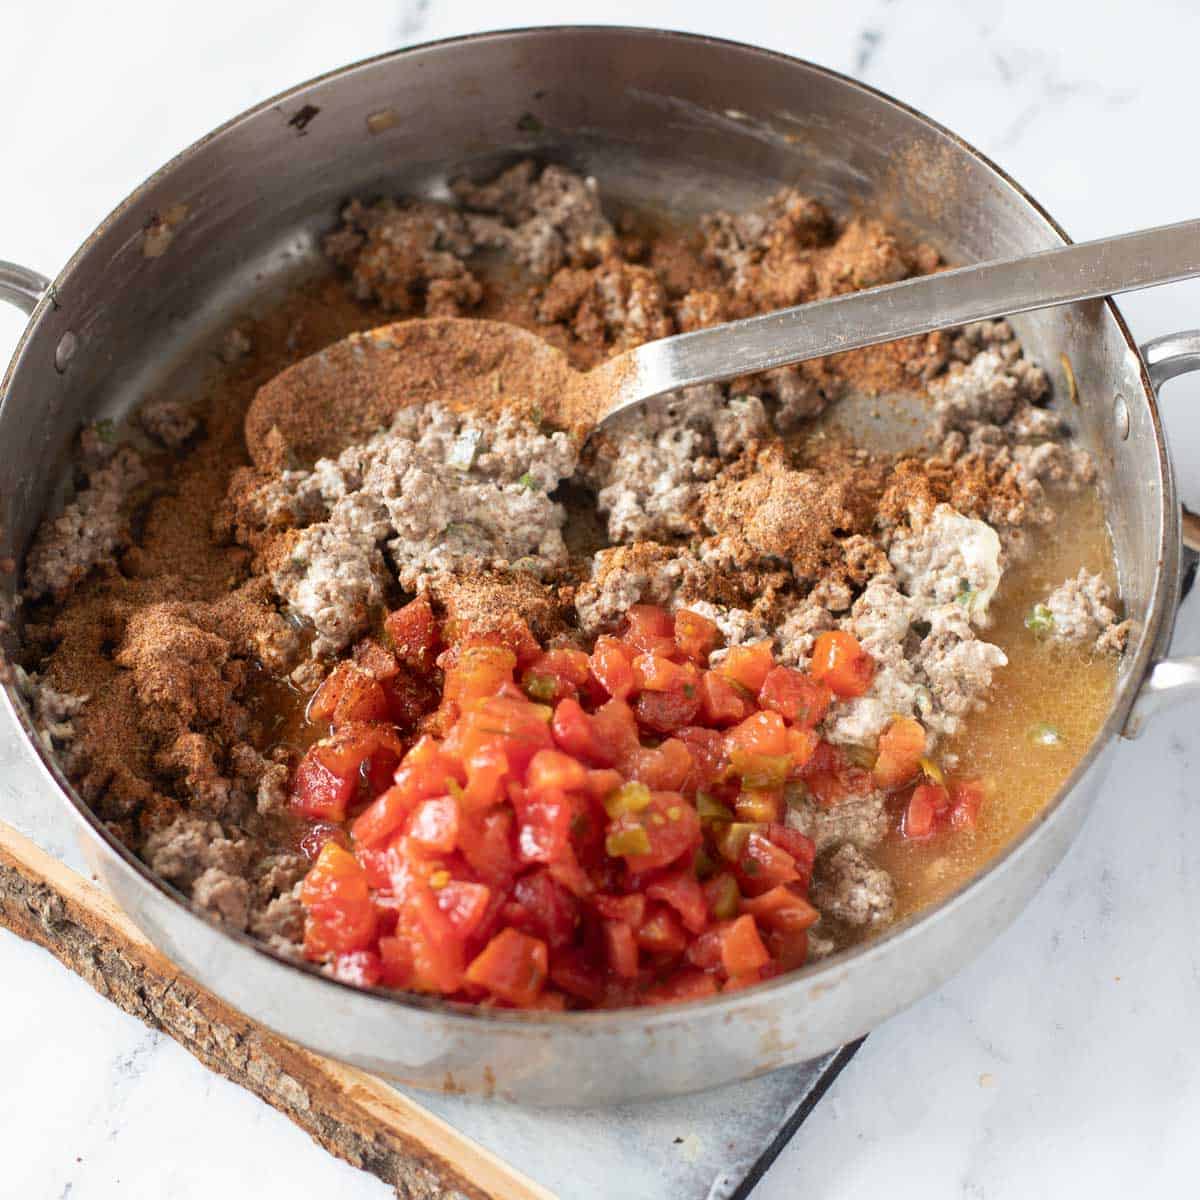 Photo of canned tomatoes and seasoning added to ground beef, onion, cream cheese and jalapeno in a skillet